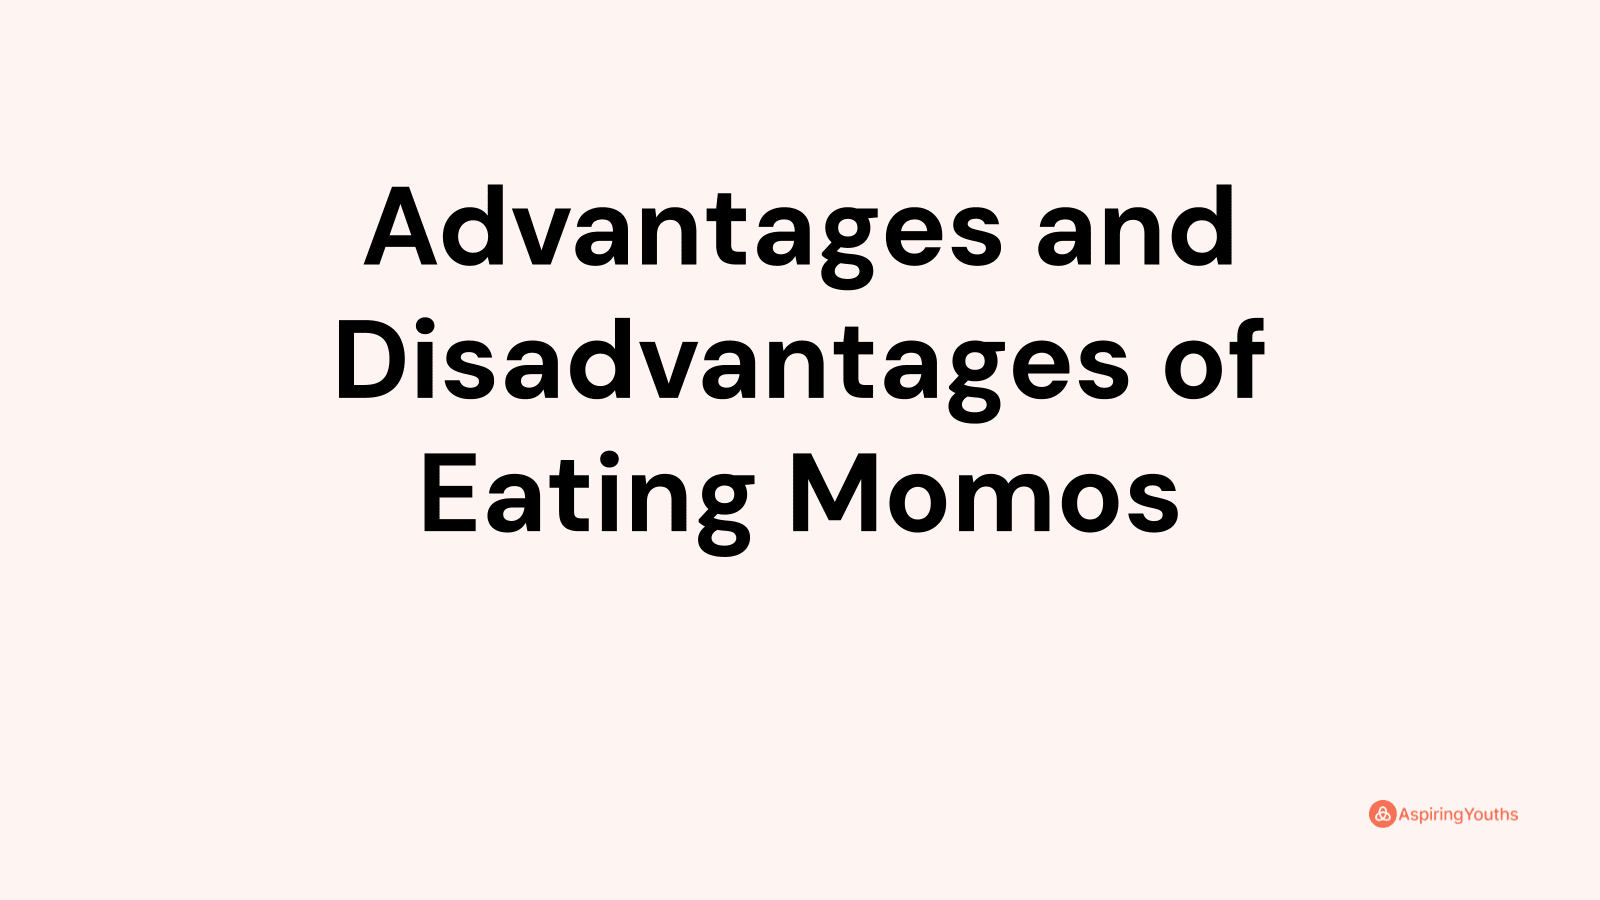 Advantages and disadvantages of Eating Momos